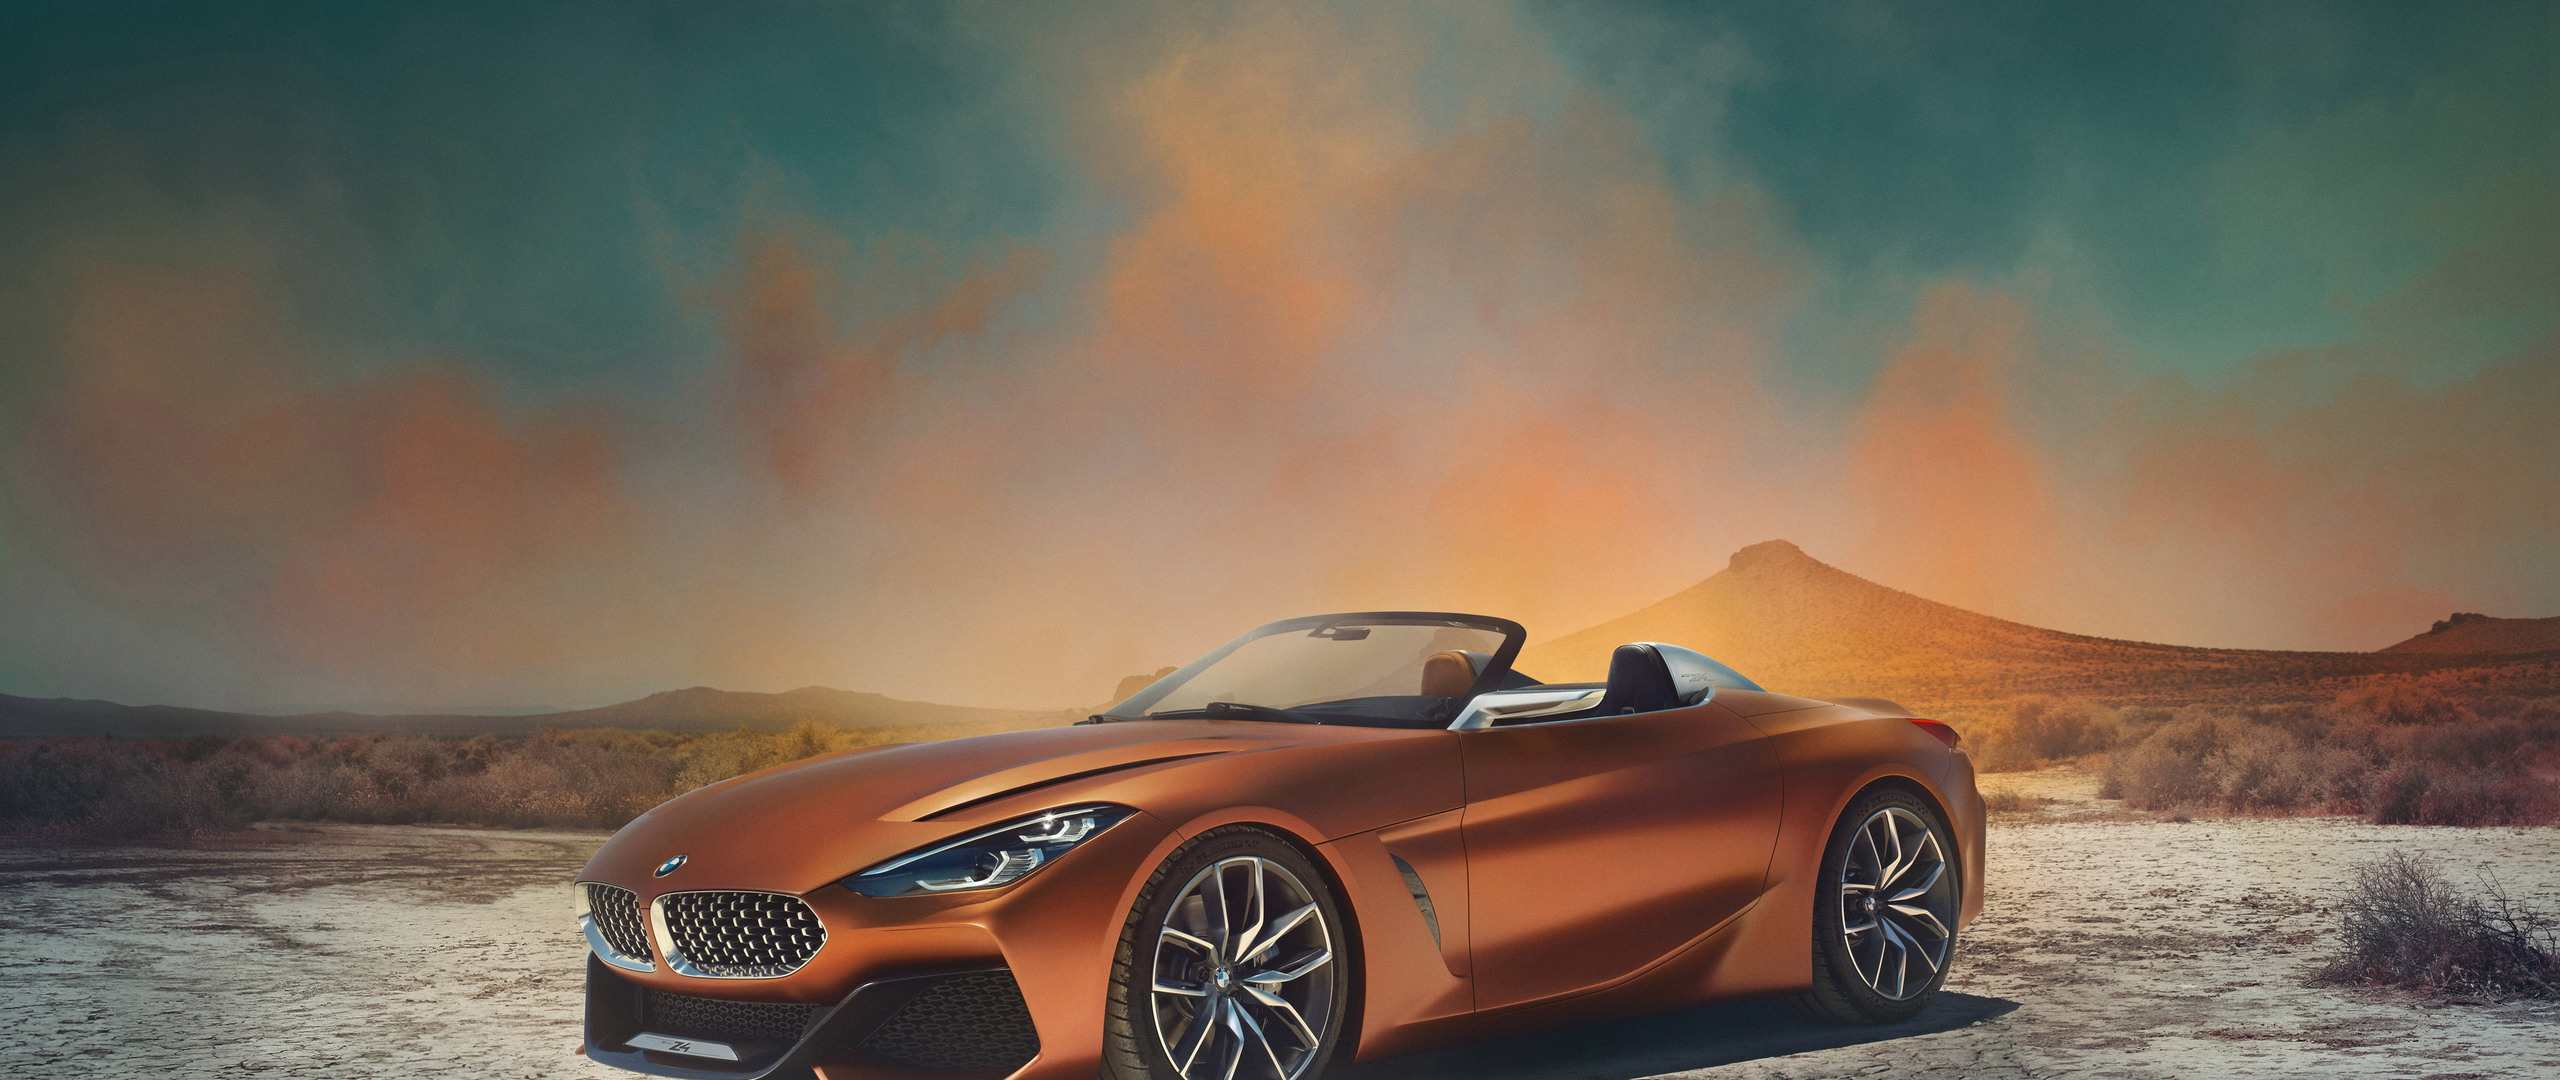 Bmw Concept Z4 Wallpapers